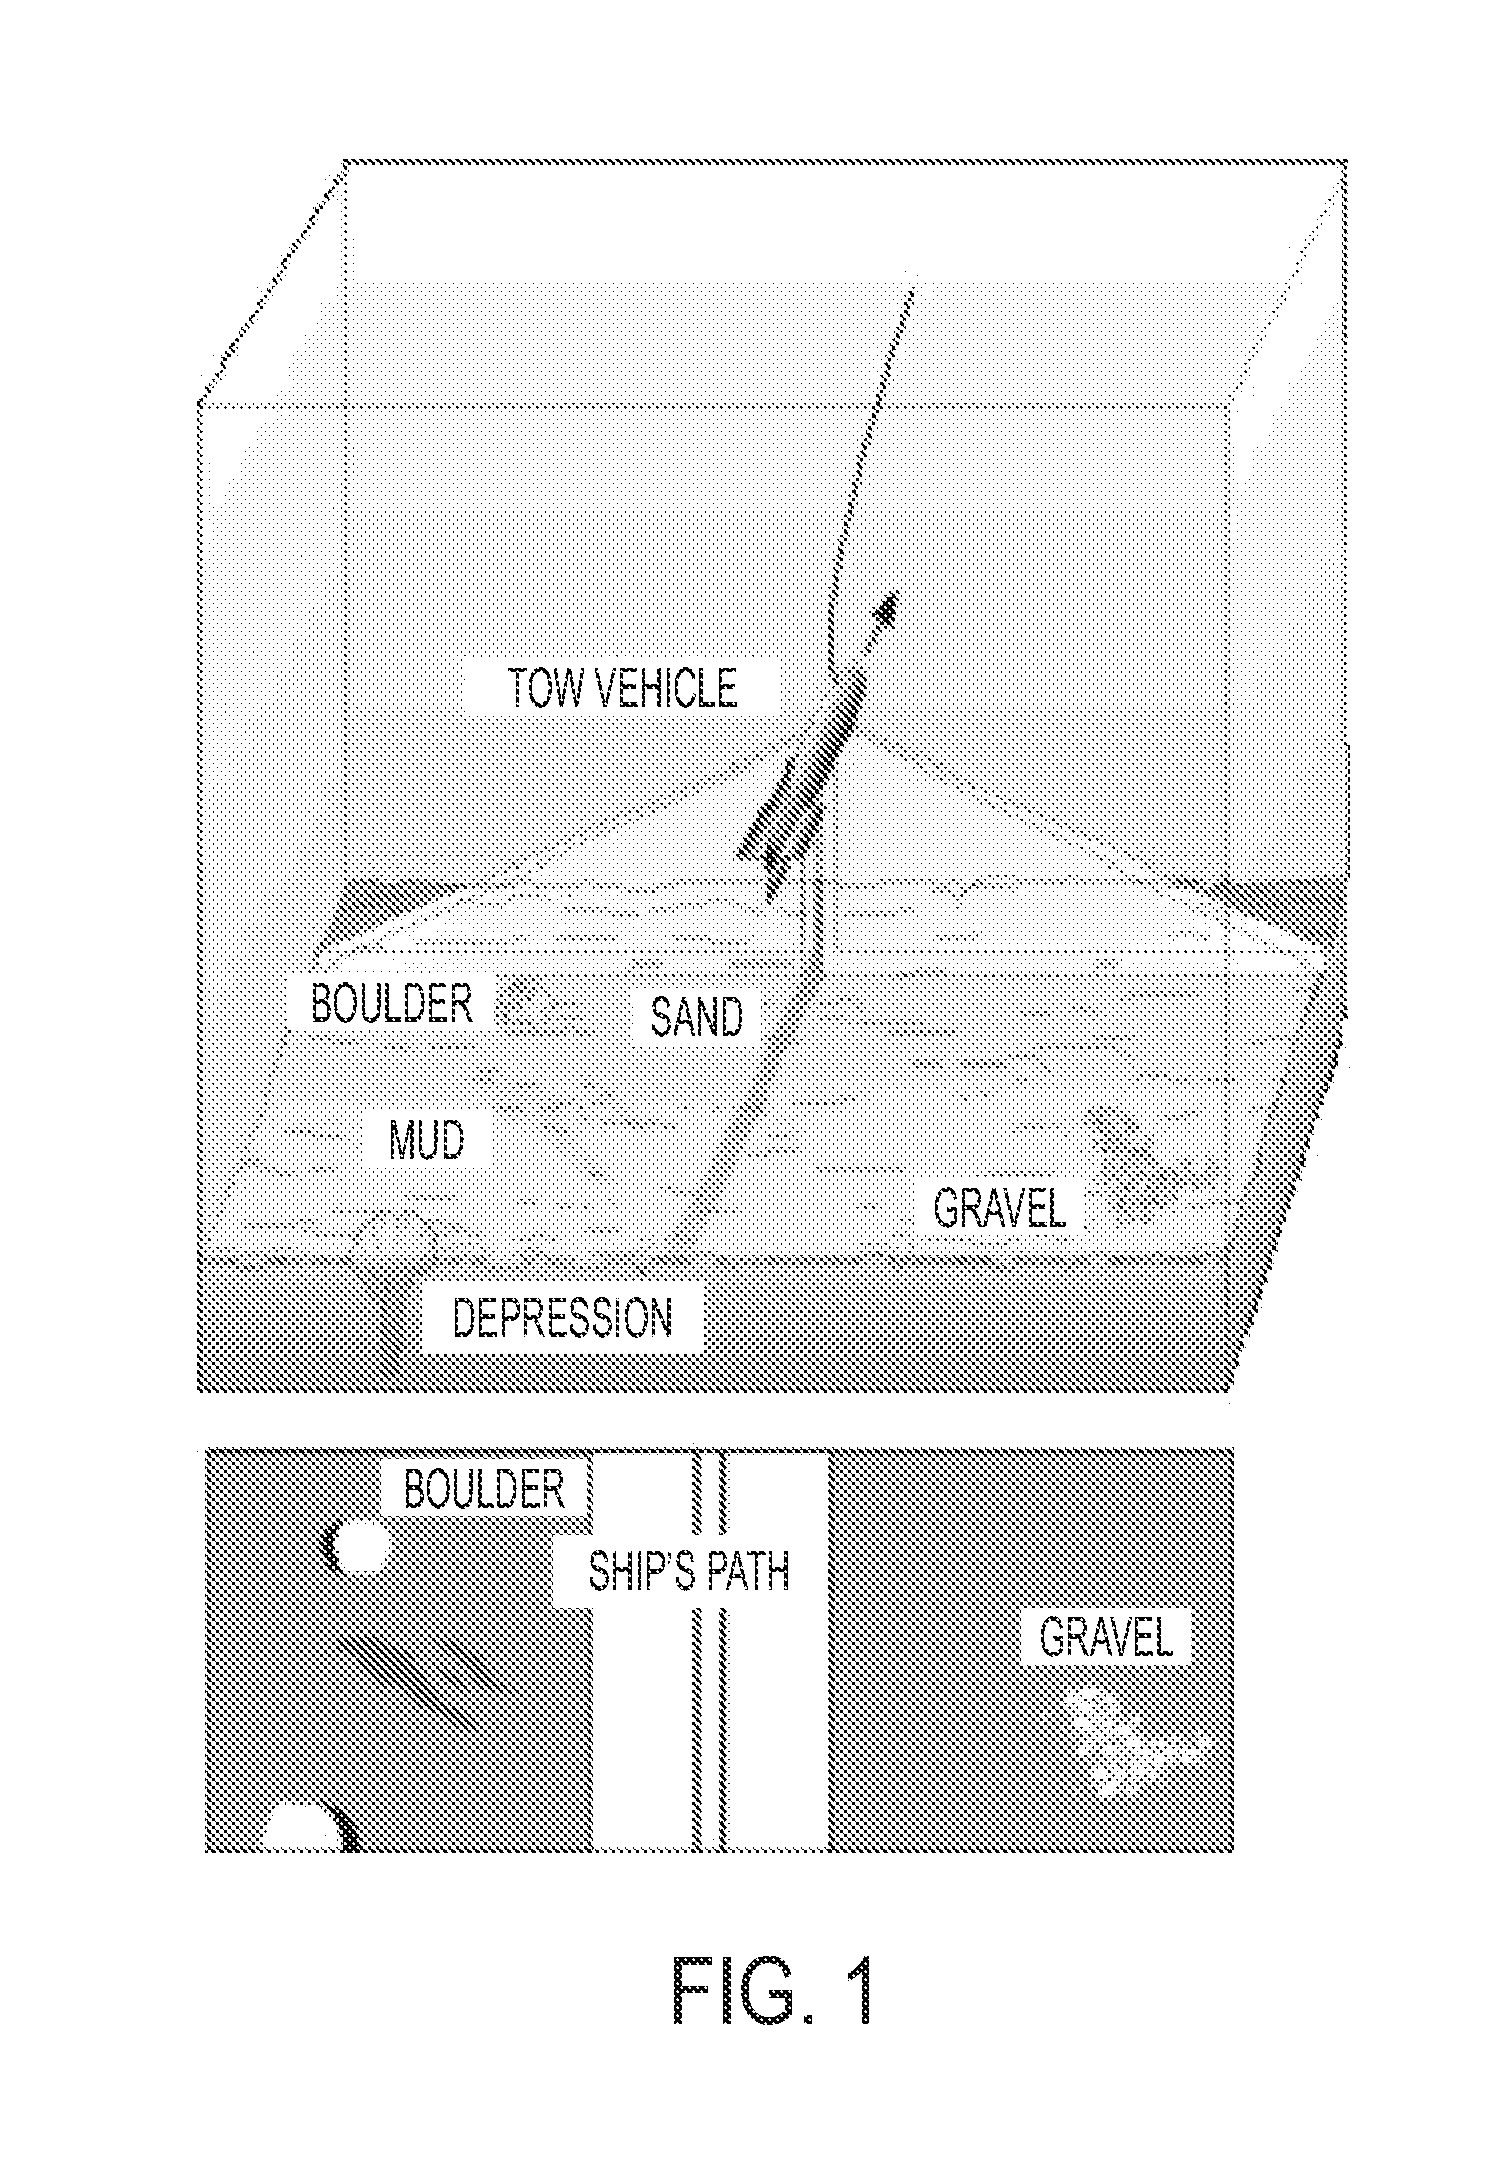 Method and System for Real-time Automated Change Detection and Classification for Images